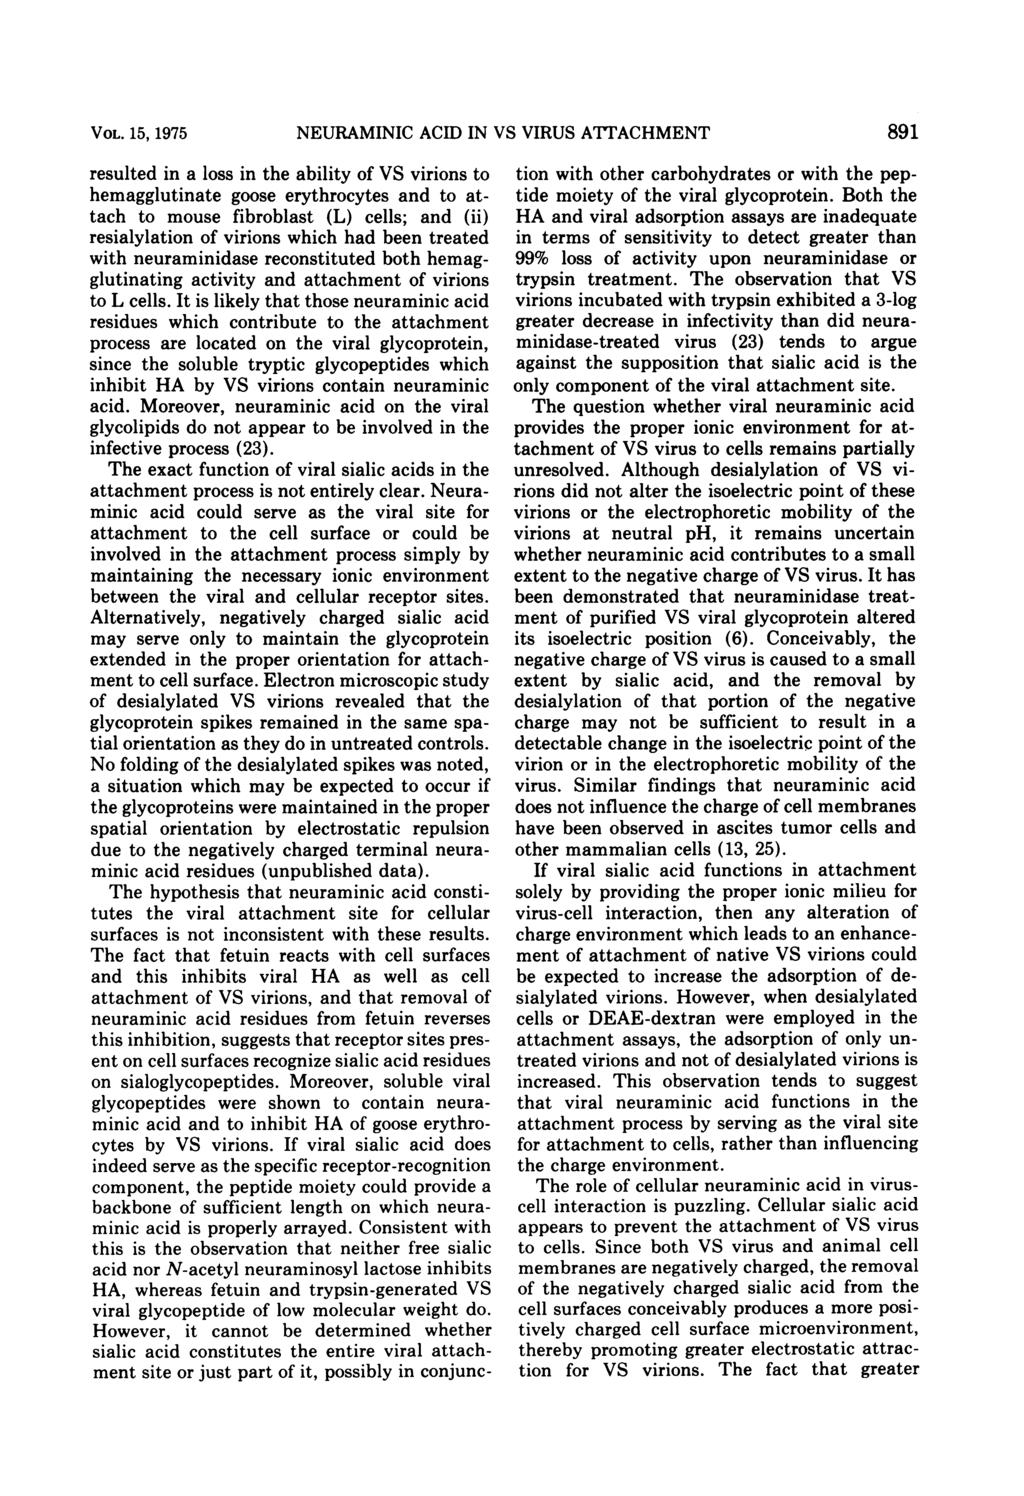 VOL. 15, 1975 NEURAMINIC ACID IN VS VIRUS ATTACHMENT 891 resulted in a loss in the ability of VS virions to hemagglutinate goose erythrocytes and to attach to mouse fibroblast (L) cells; and (ii)